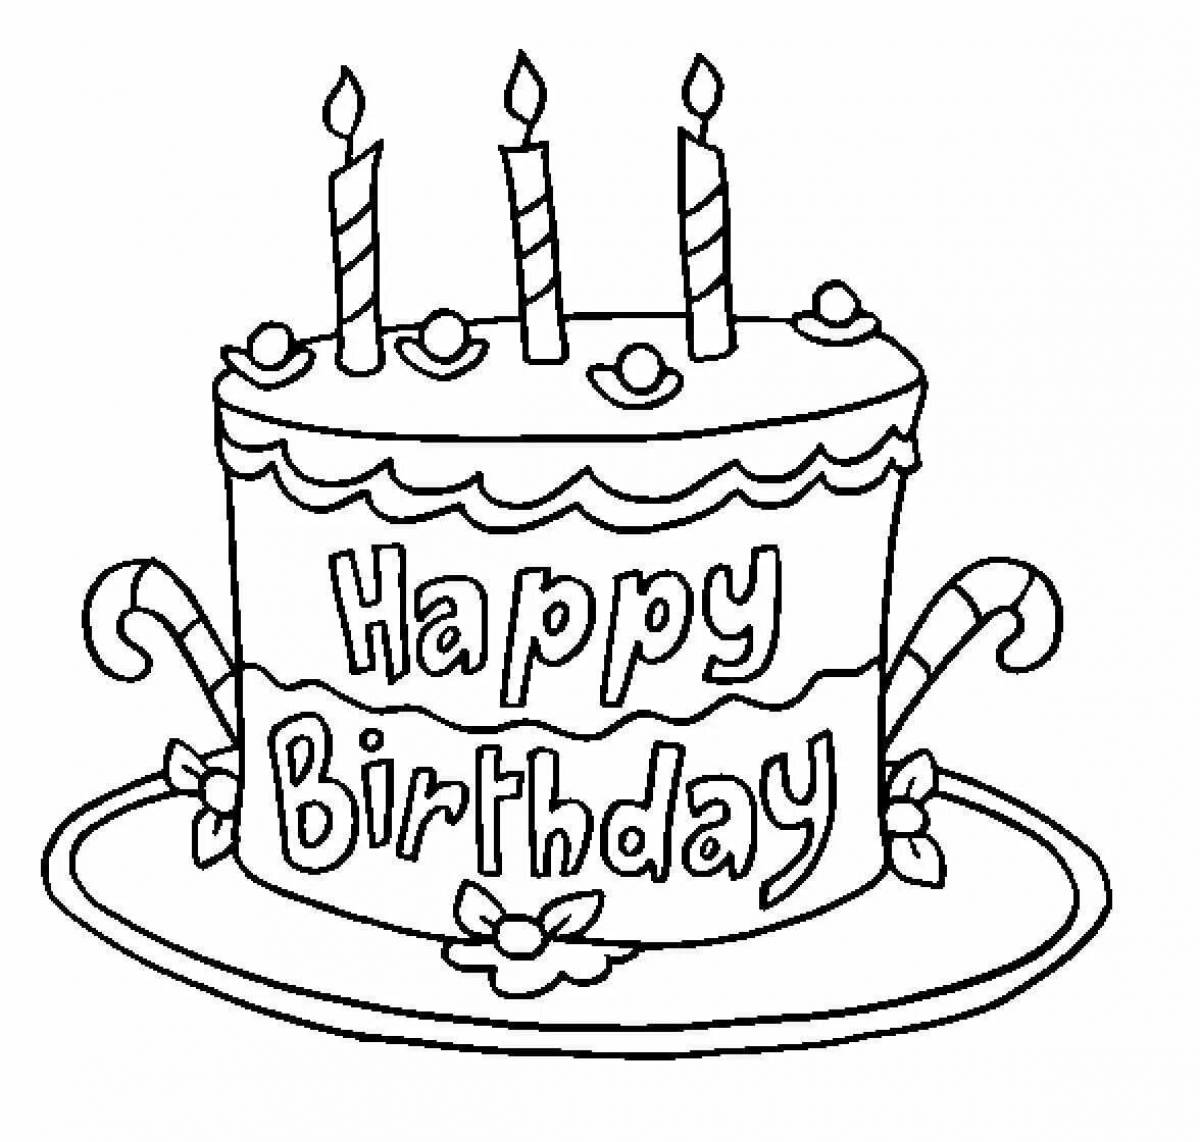 10 year happy birthday coloring page